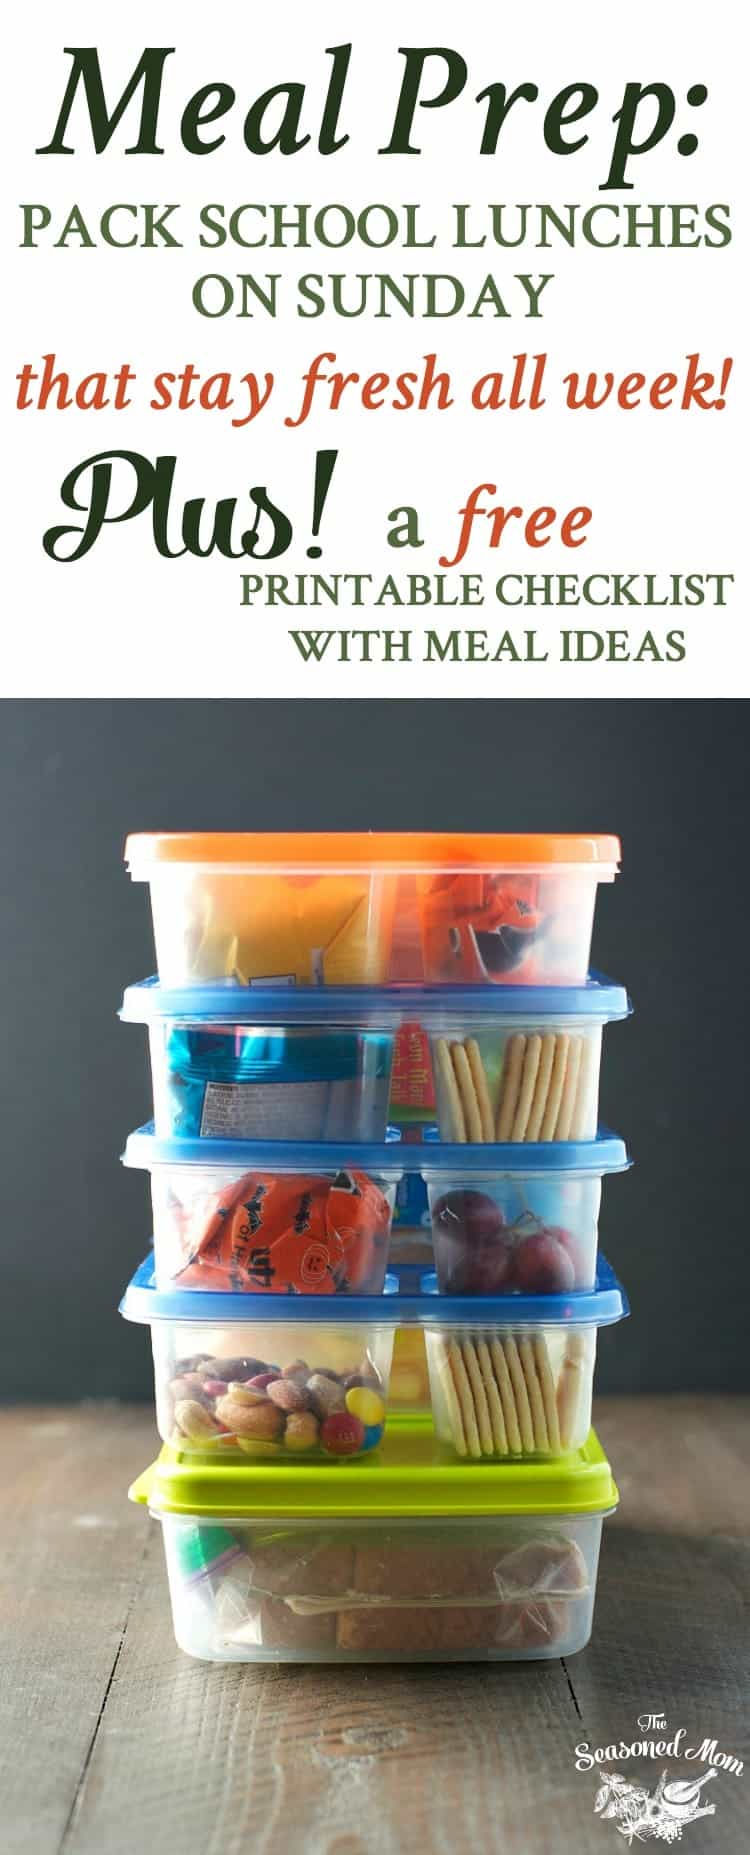 Learn the easy way to meal prep: pack school lunches on Sunday that stay fresh all week! PLUS, a free printable checklist with lunch ideas!